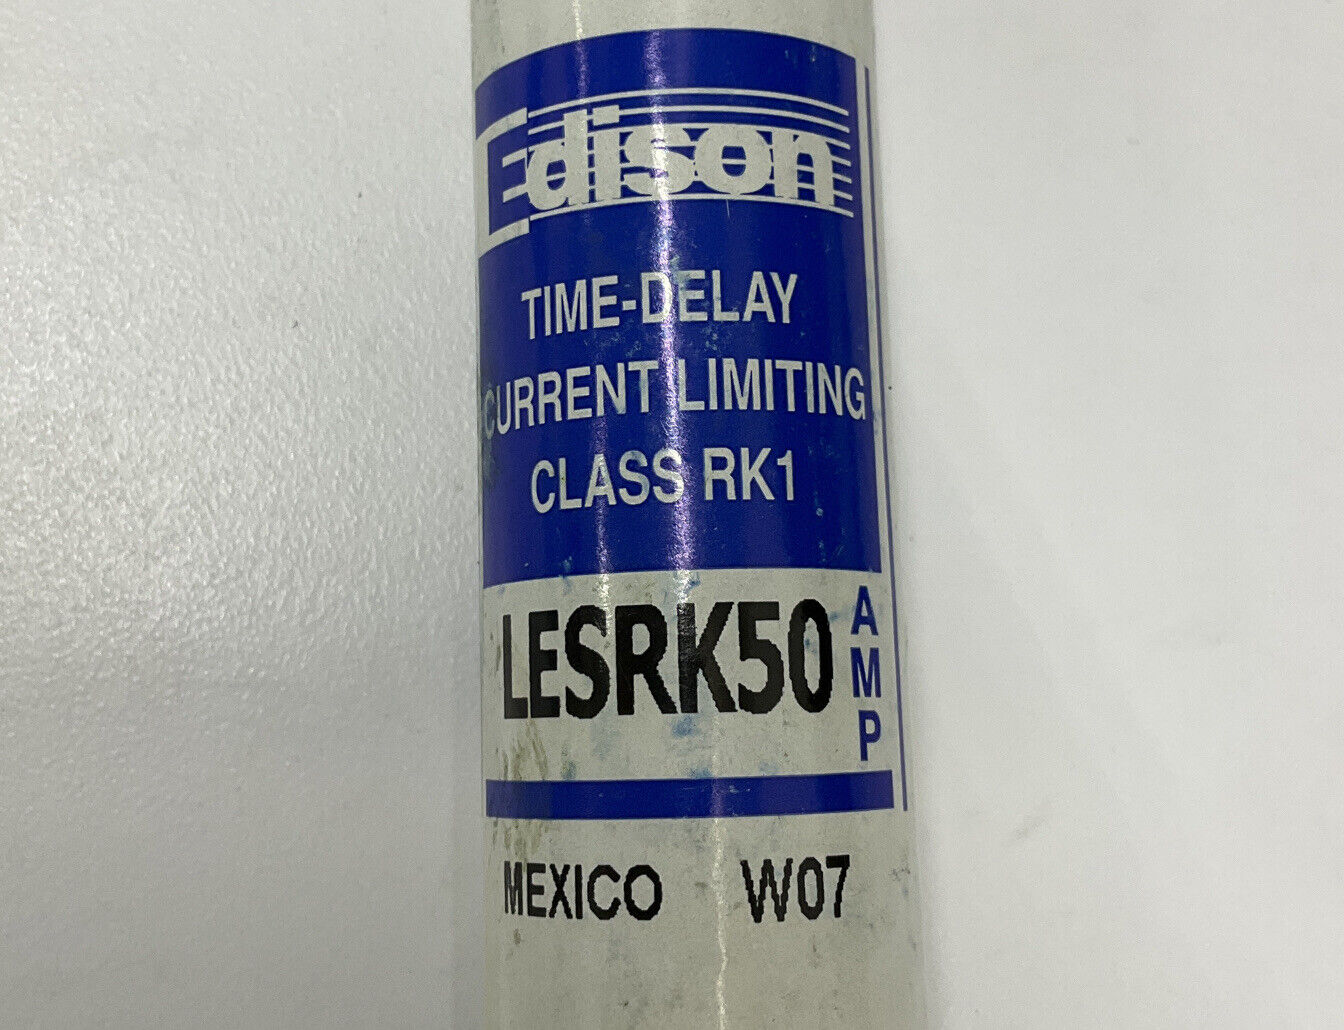 Edison Time-Delay Current Limiting RK1 LESK50 (CL115)